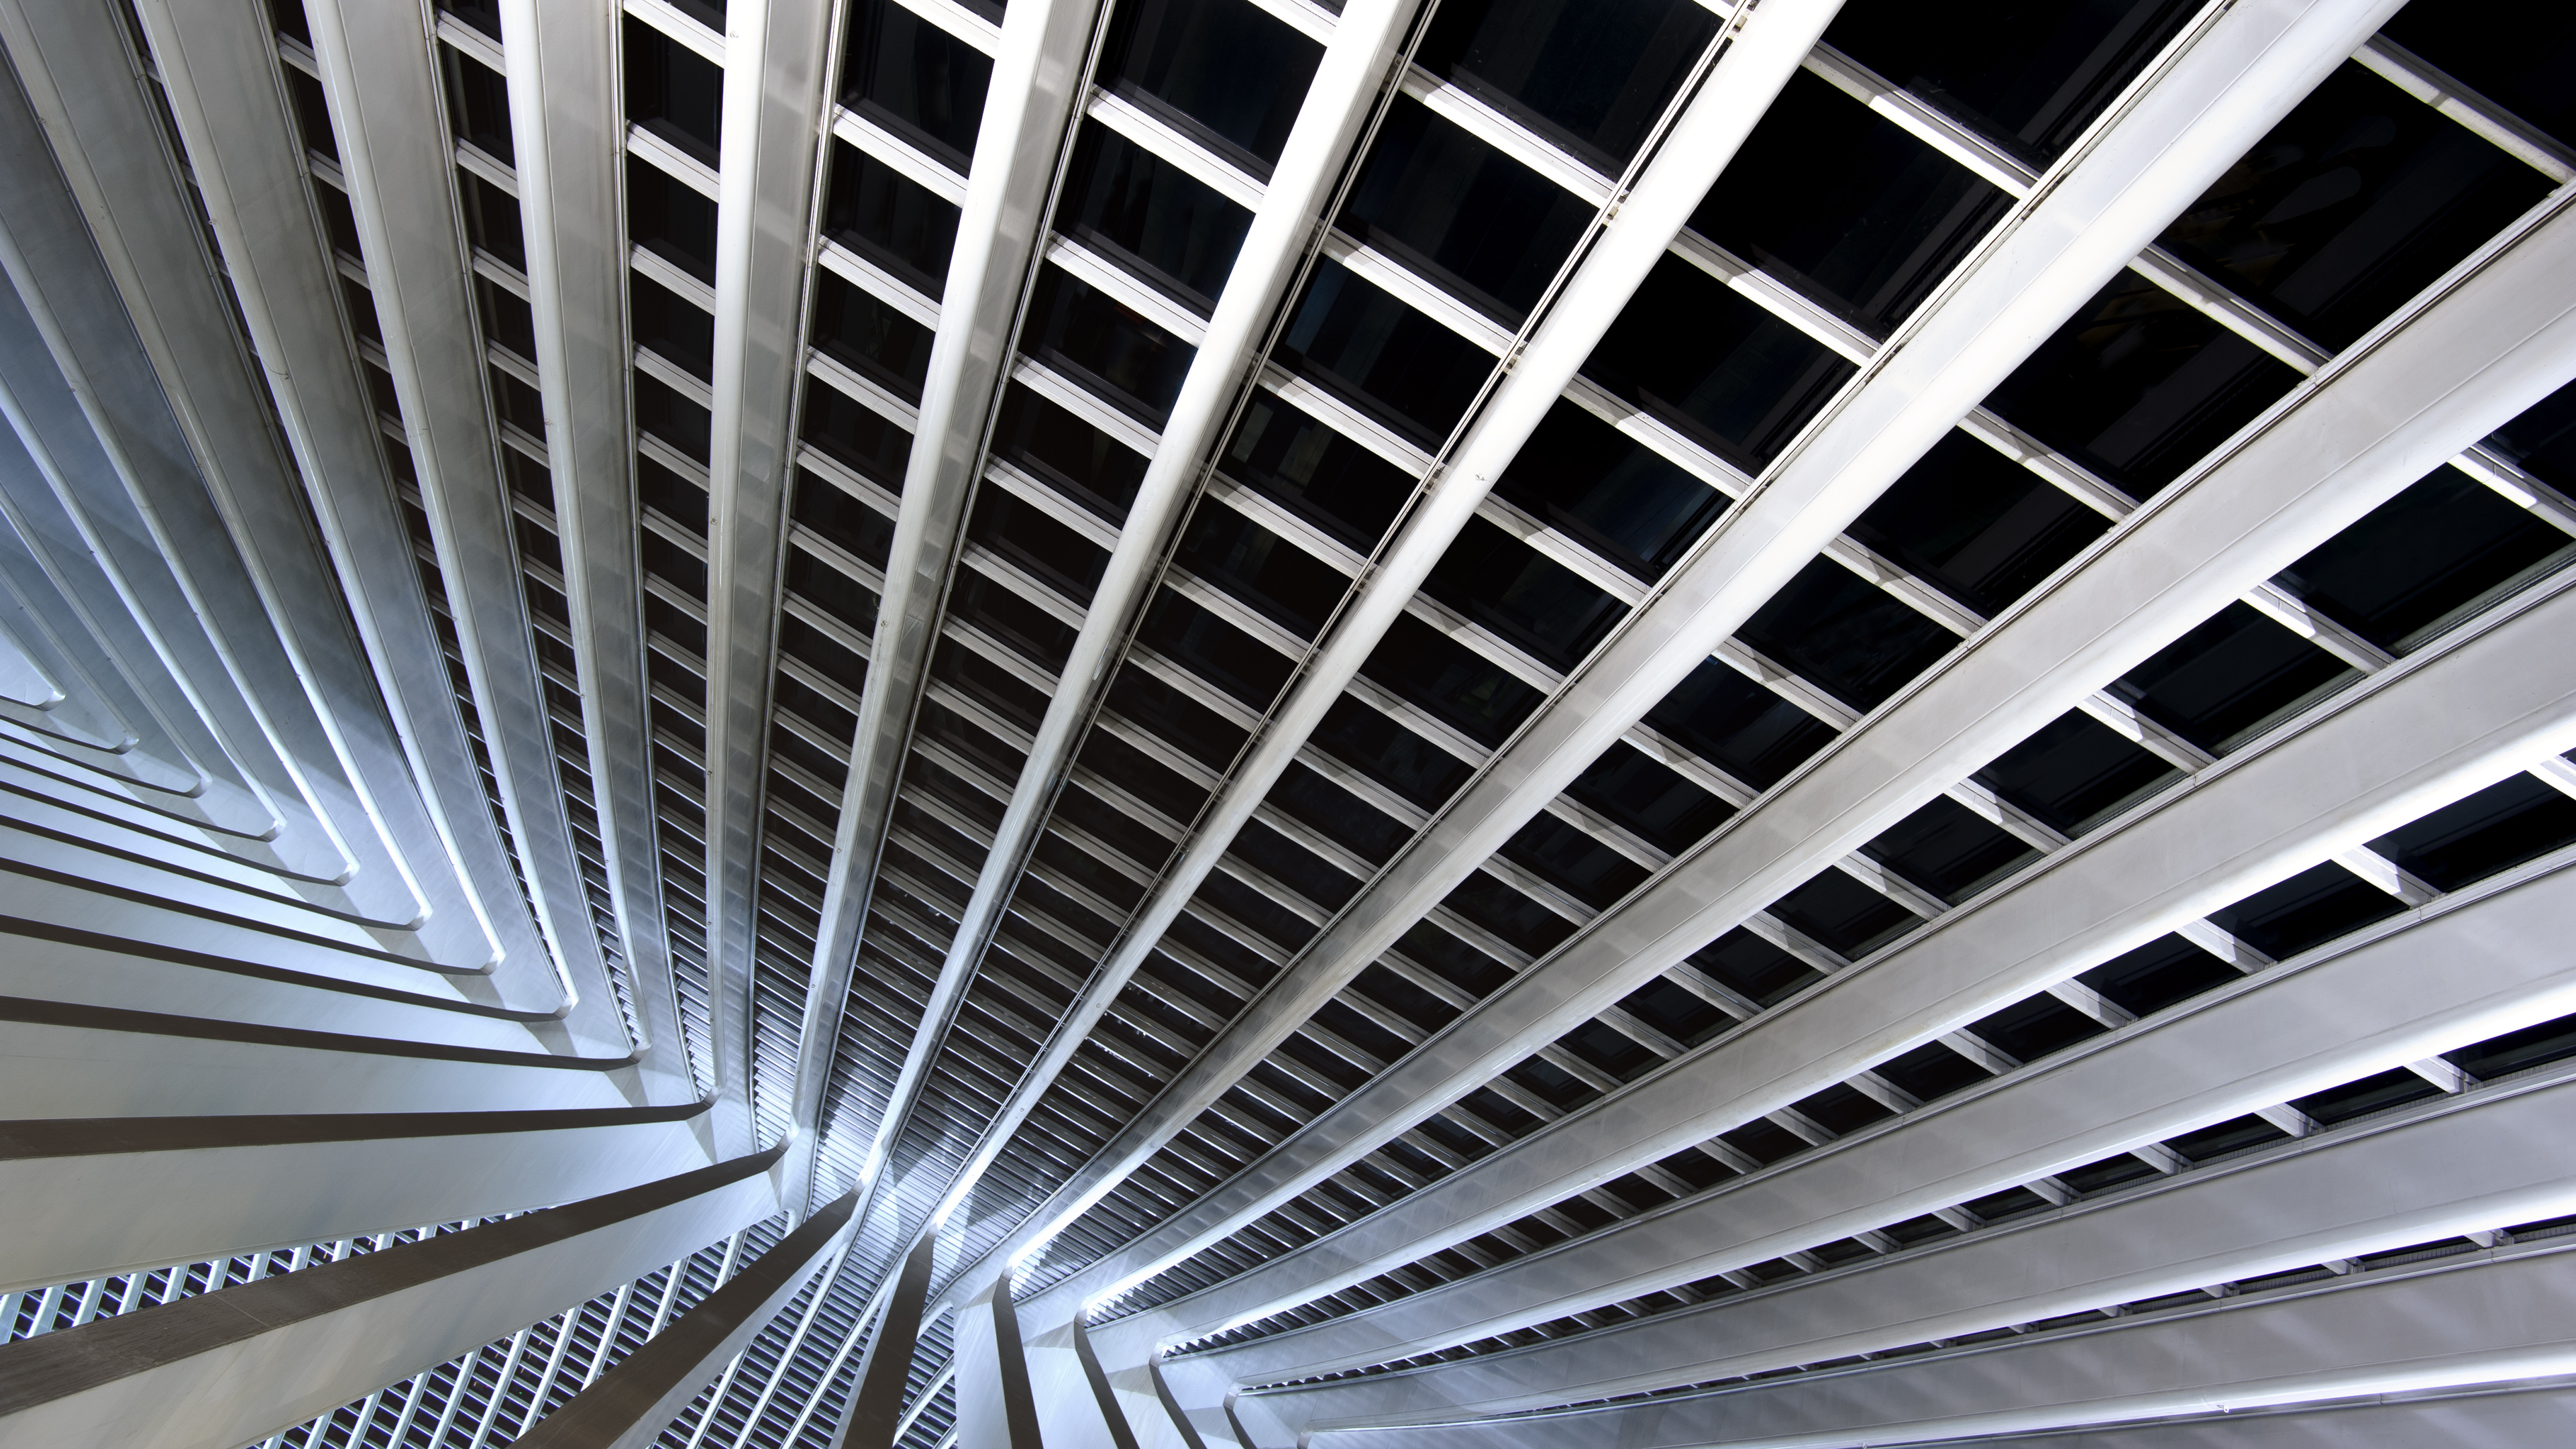 Sky Architecture Building Ceiling Pattern 3840x2160